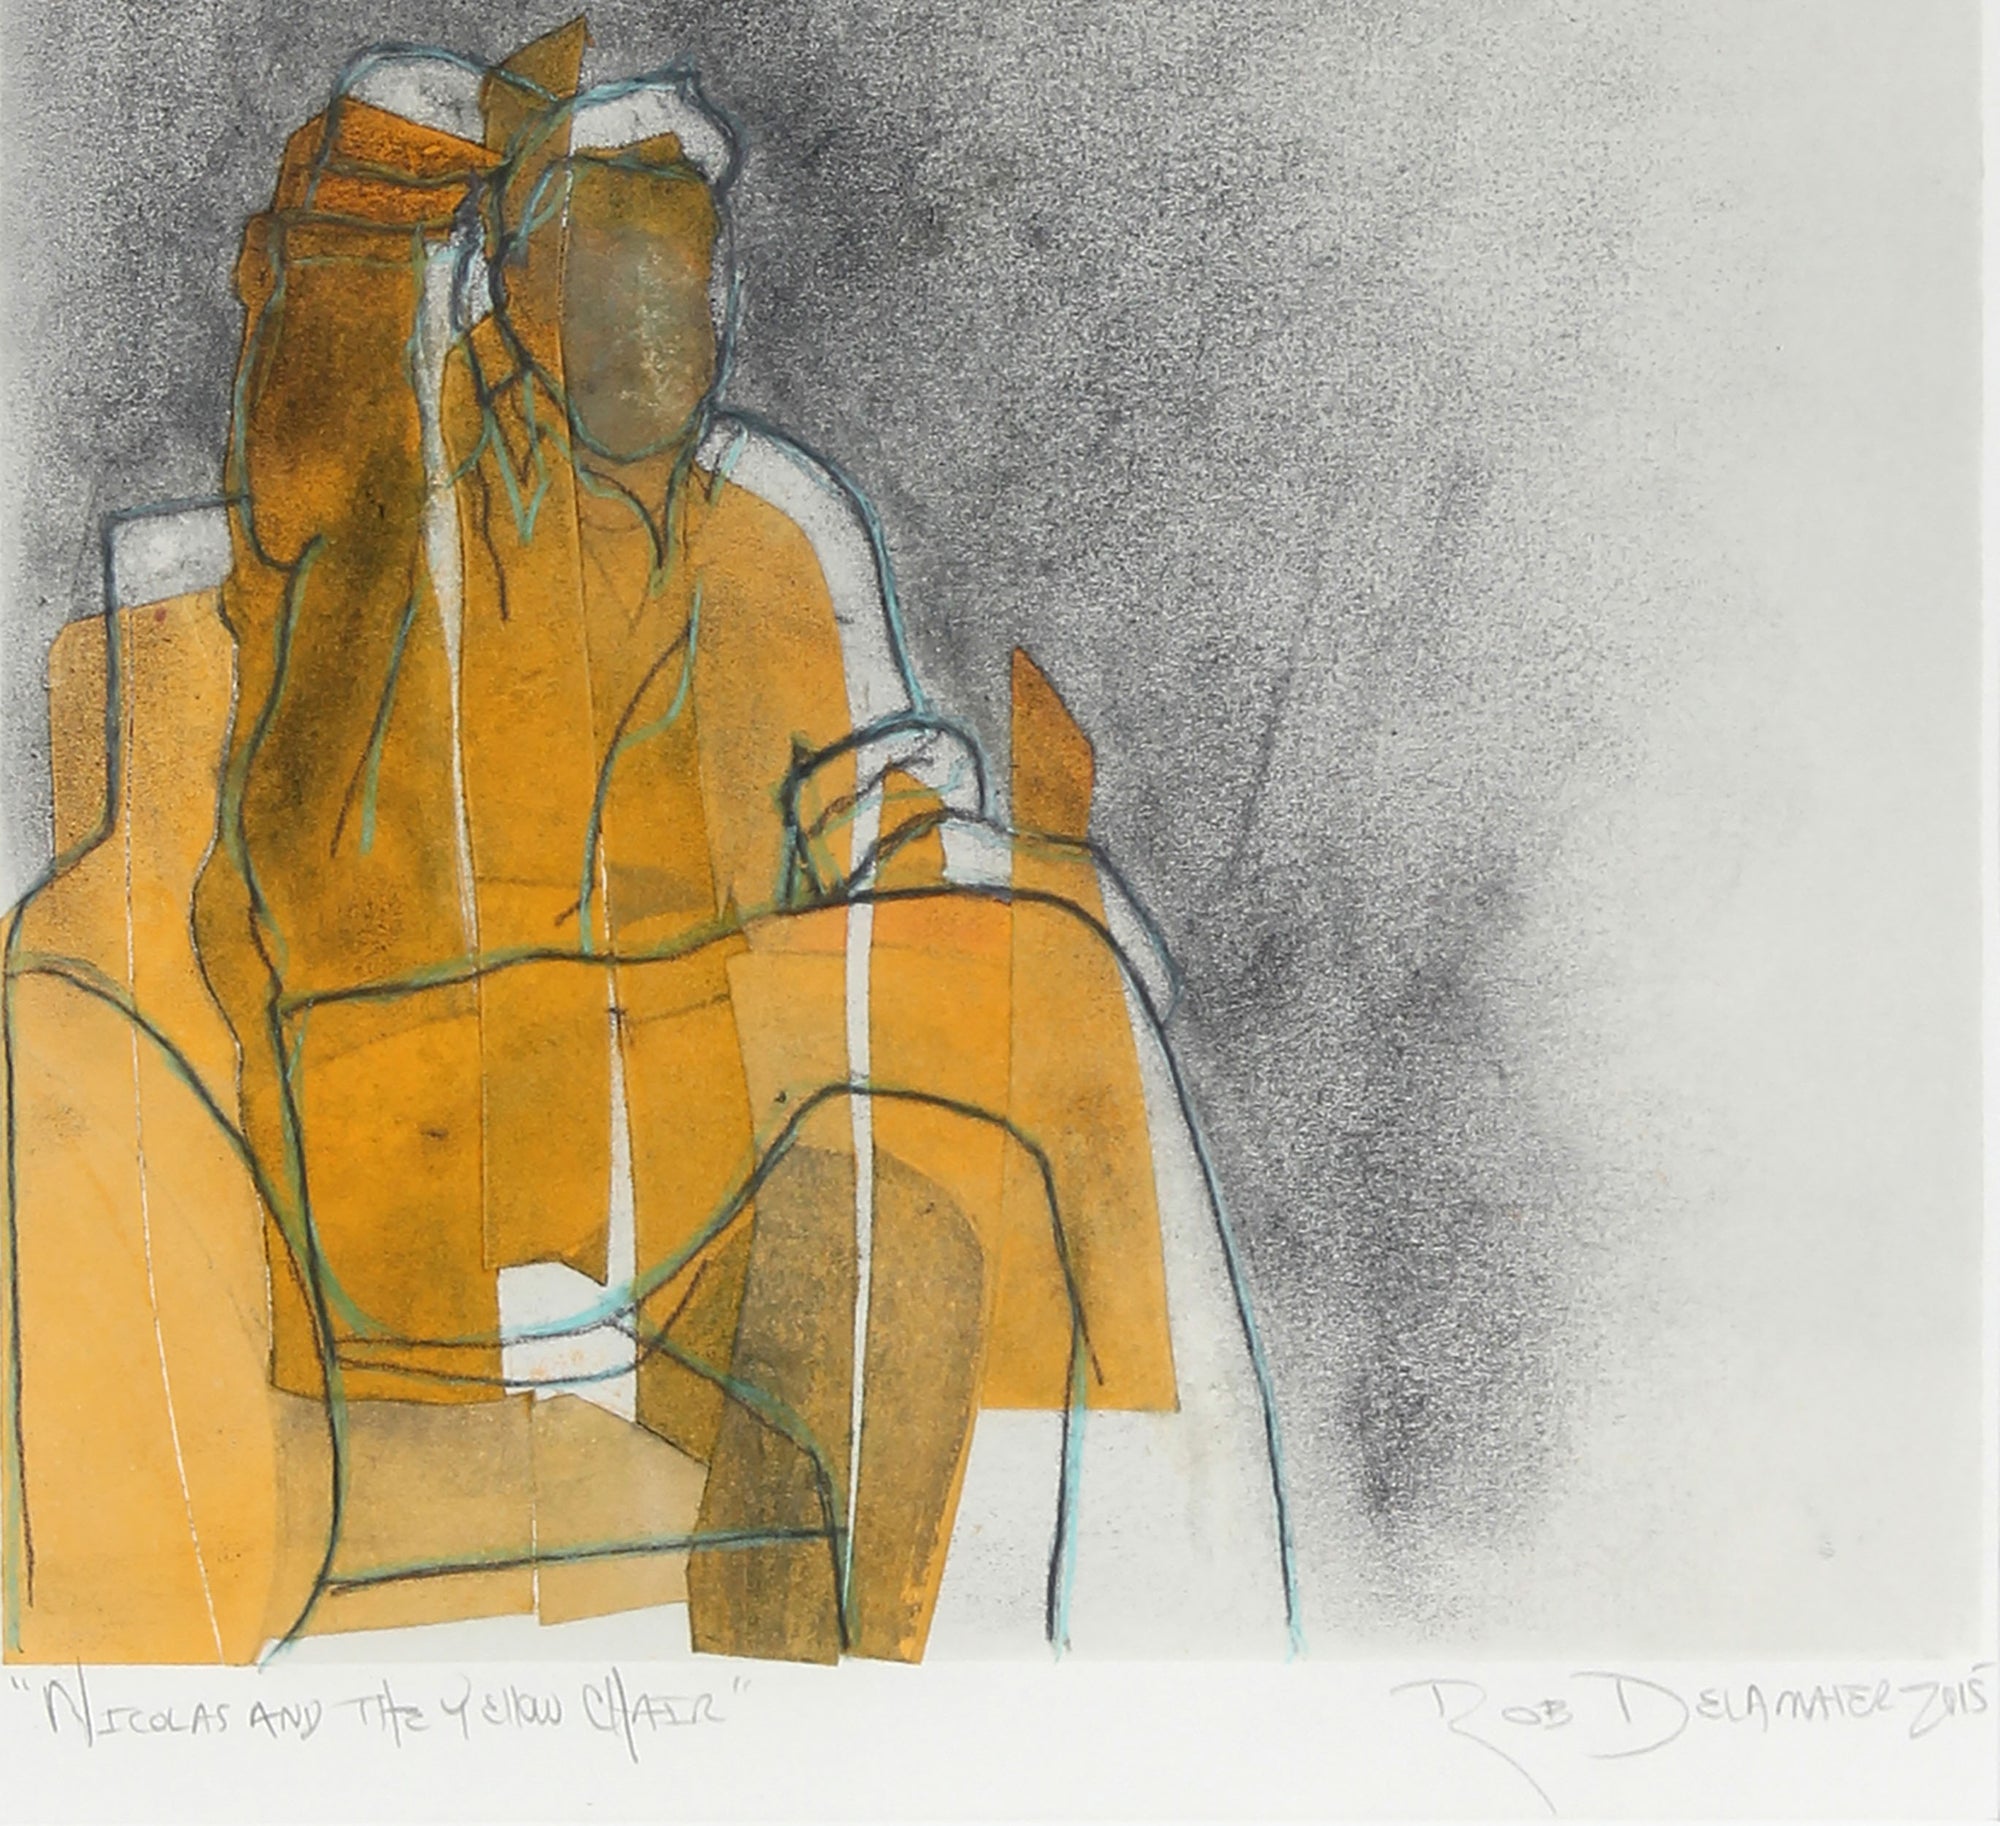 <i>Nicholas and the Yellow Chair</i><br>2015 Monotype<br><br>#91996